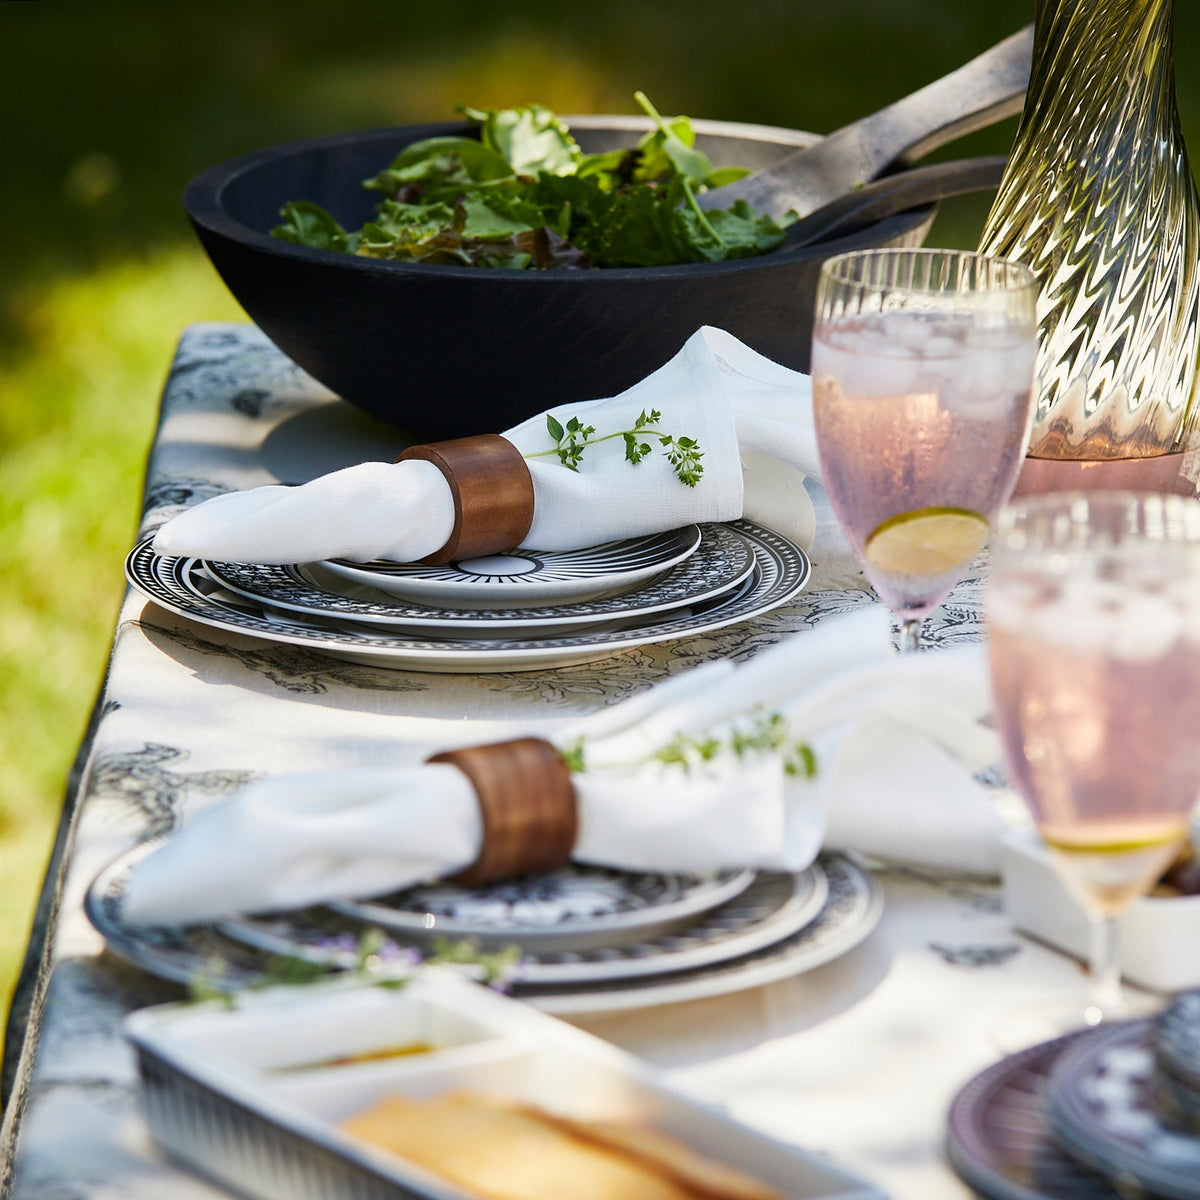 A sustainably sourced Ebonized Oak Handcrafted Salad Tossers tablecloth by Peterman&#39;s.